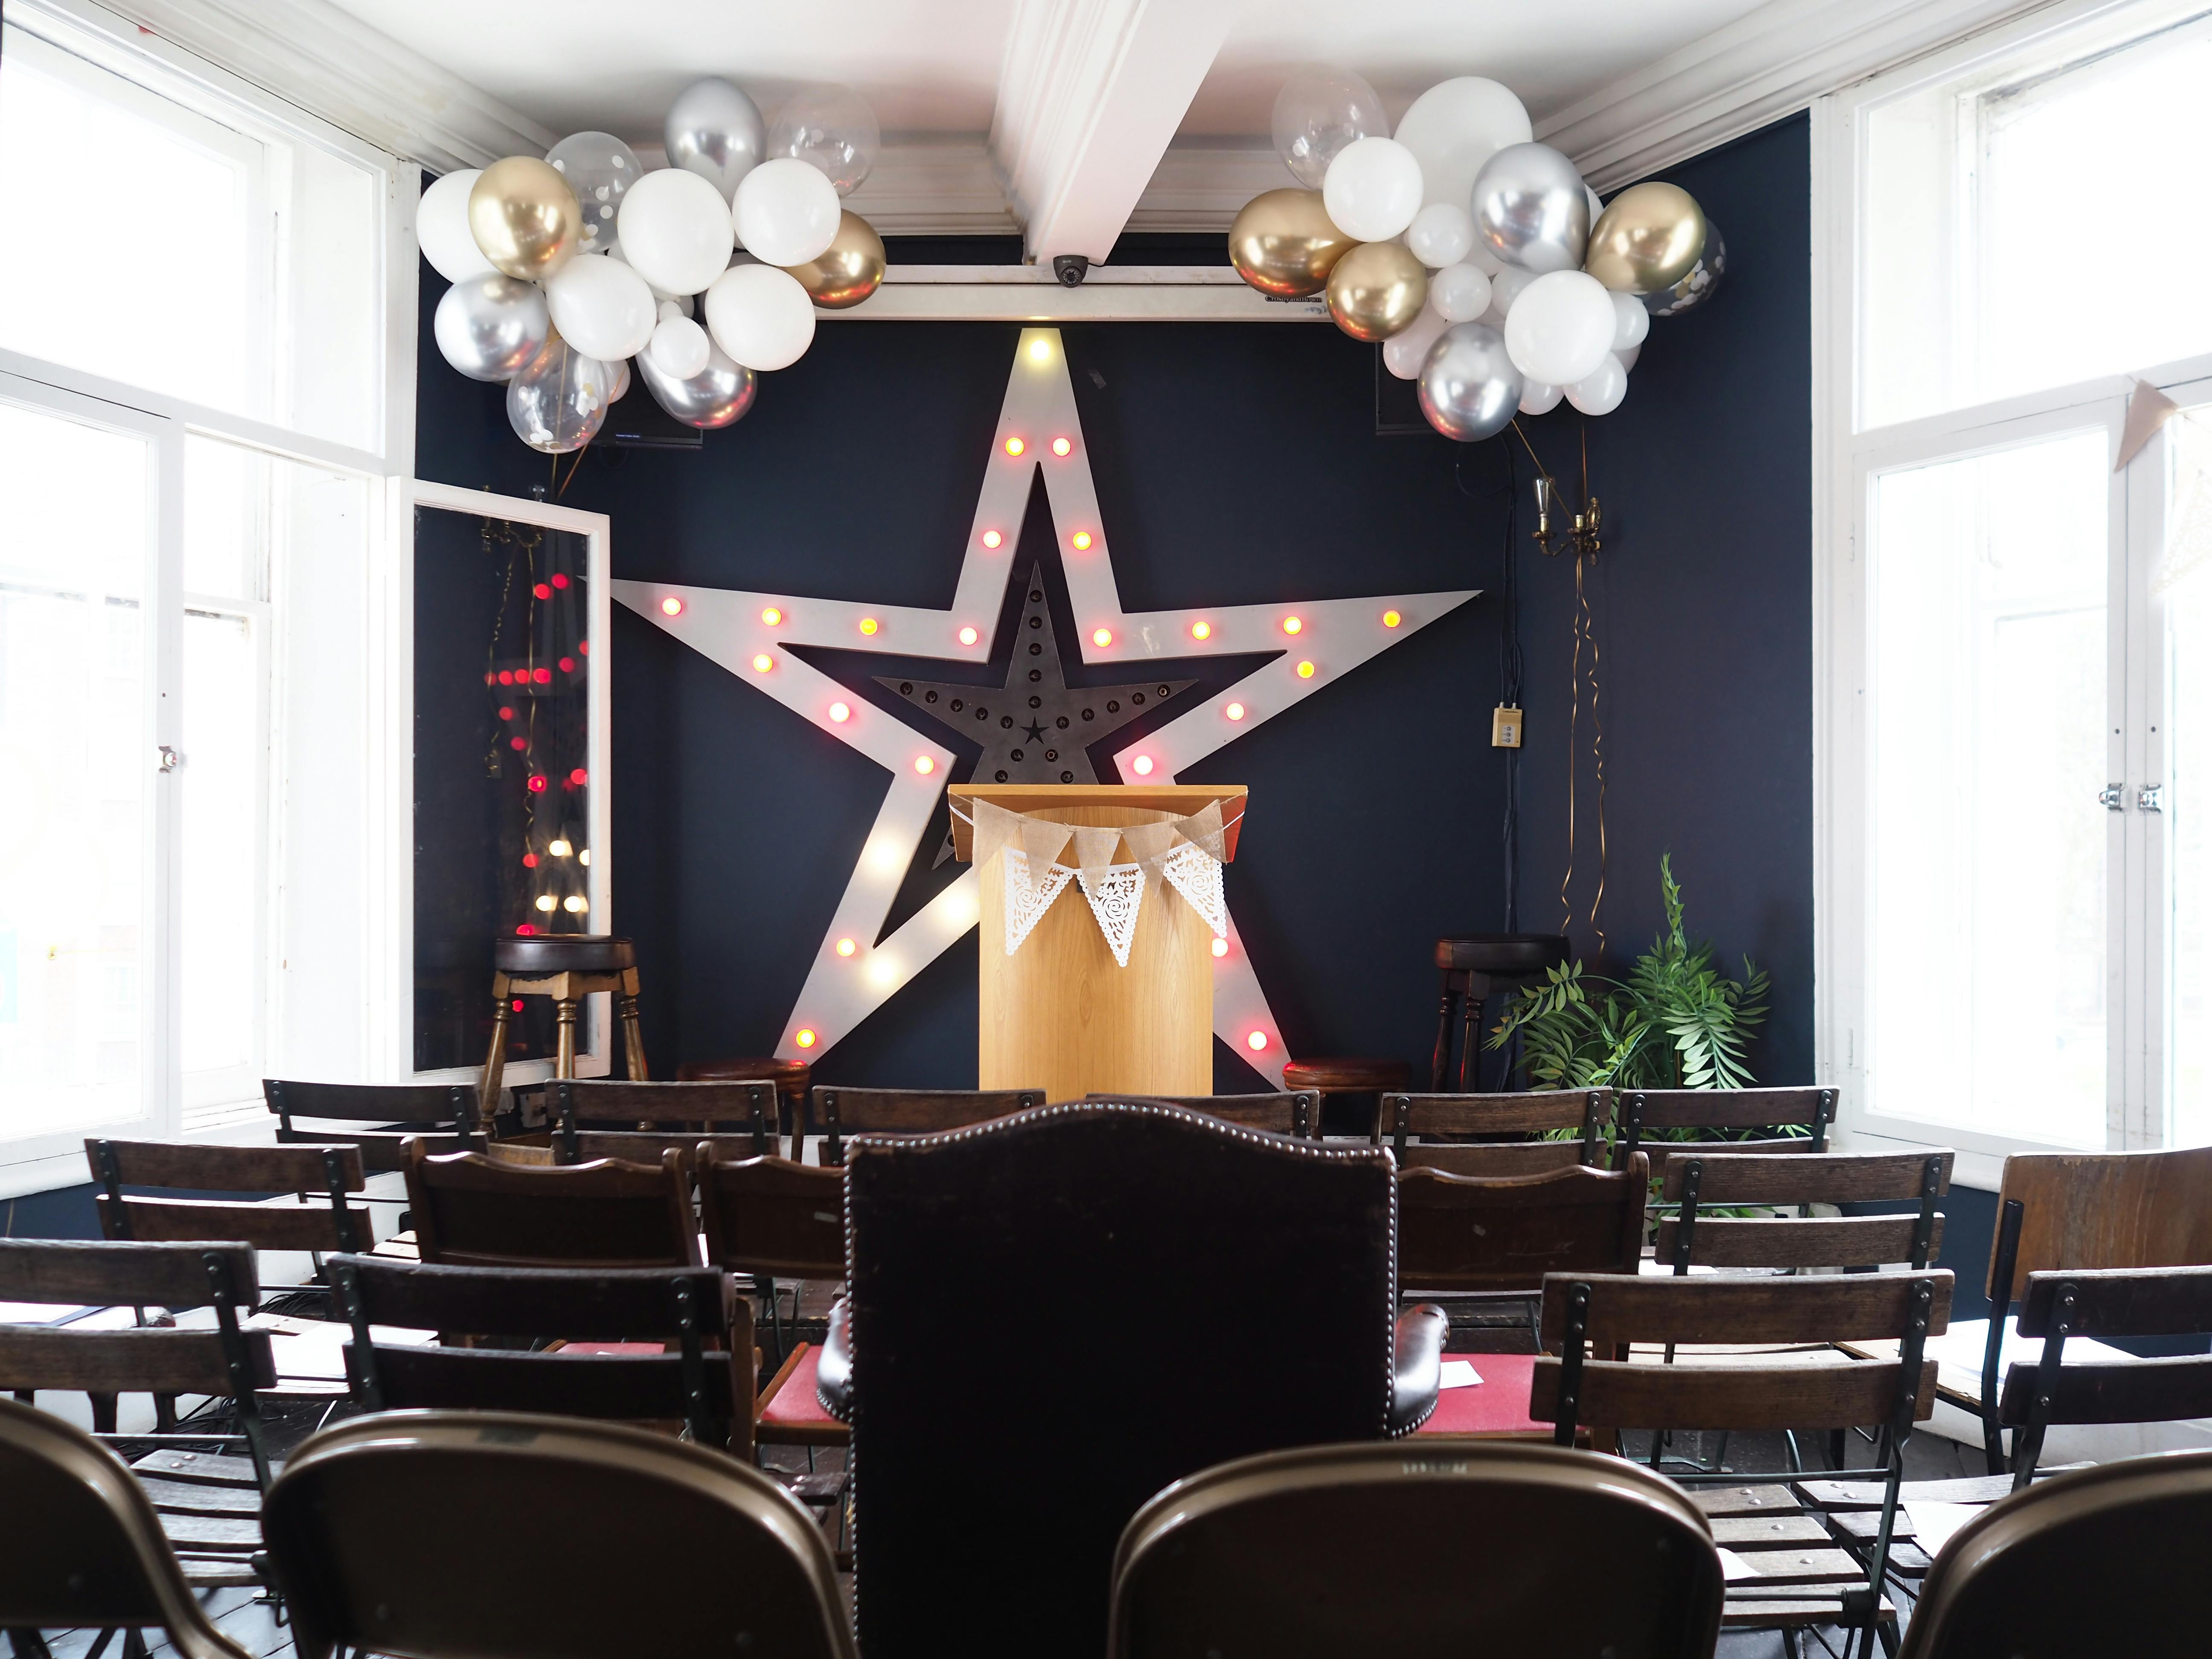 Beer Gardens - Star by Hackney Downs - Events in The Gypsy Room - Banner